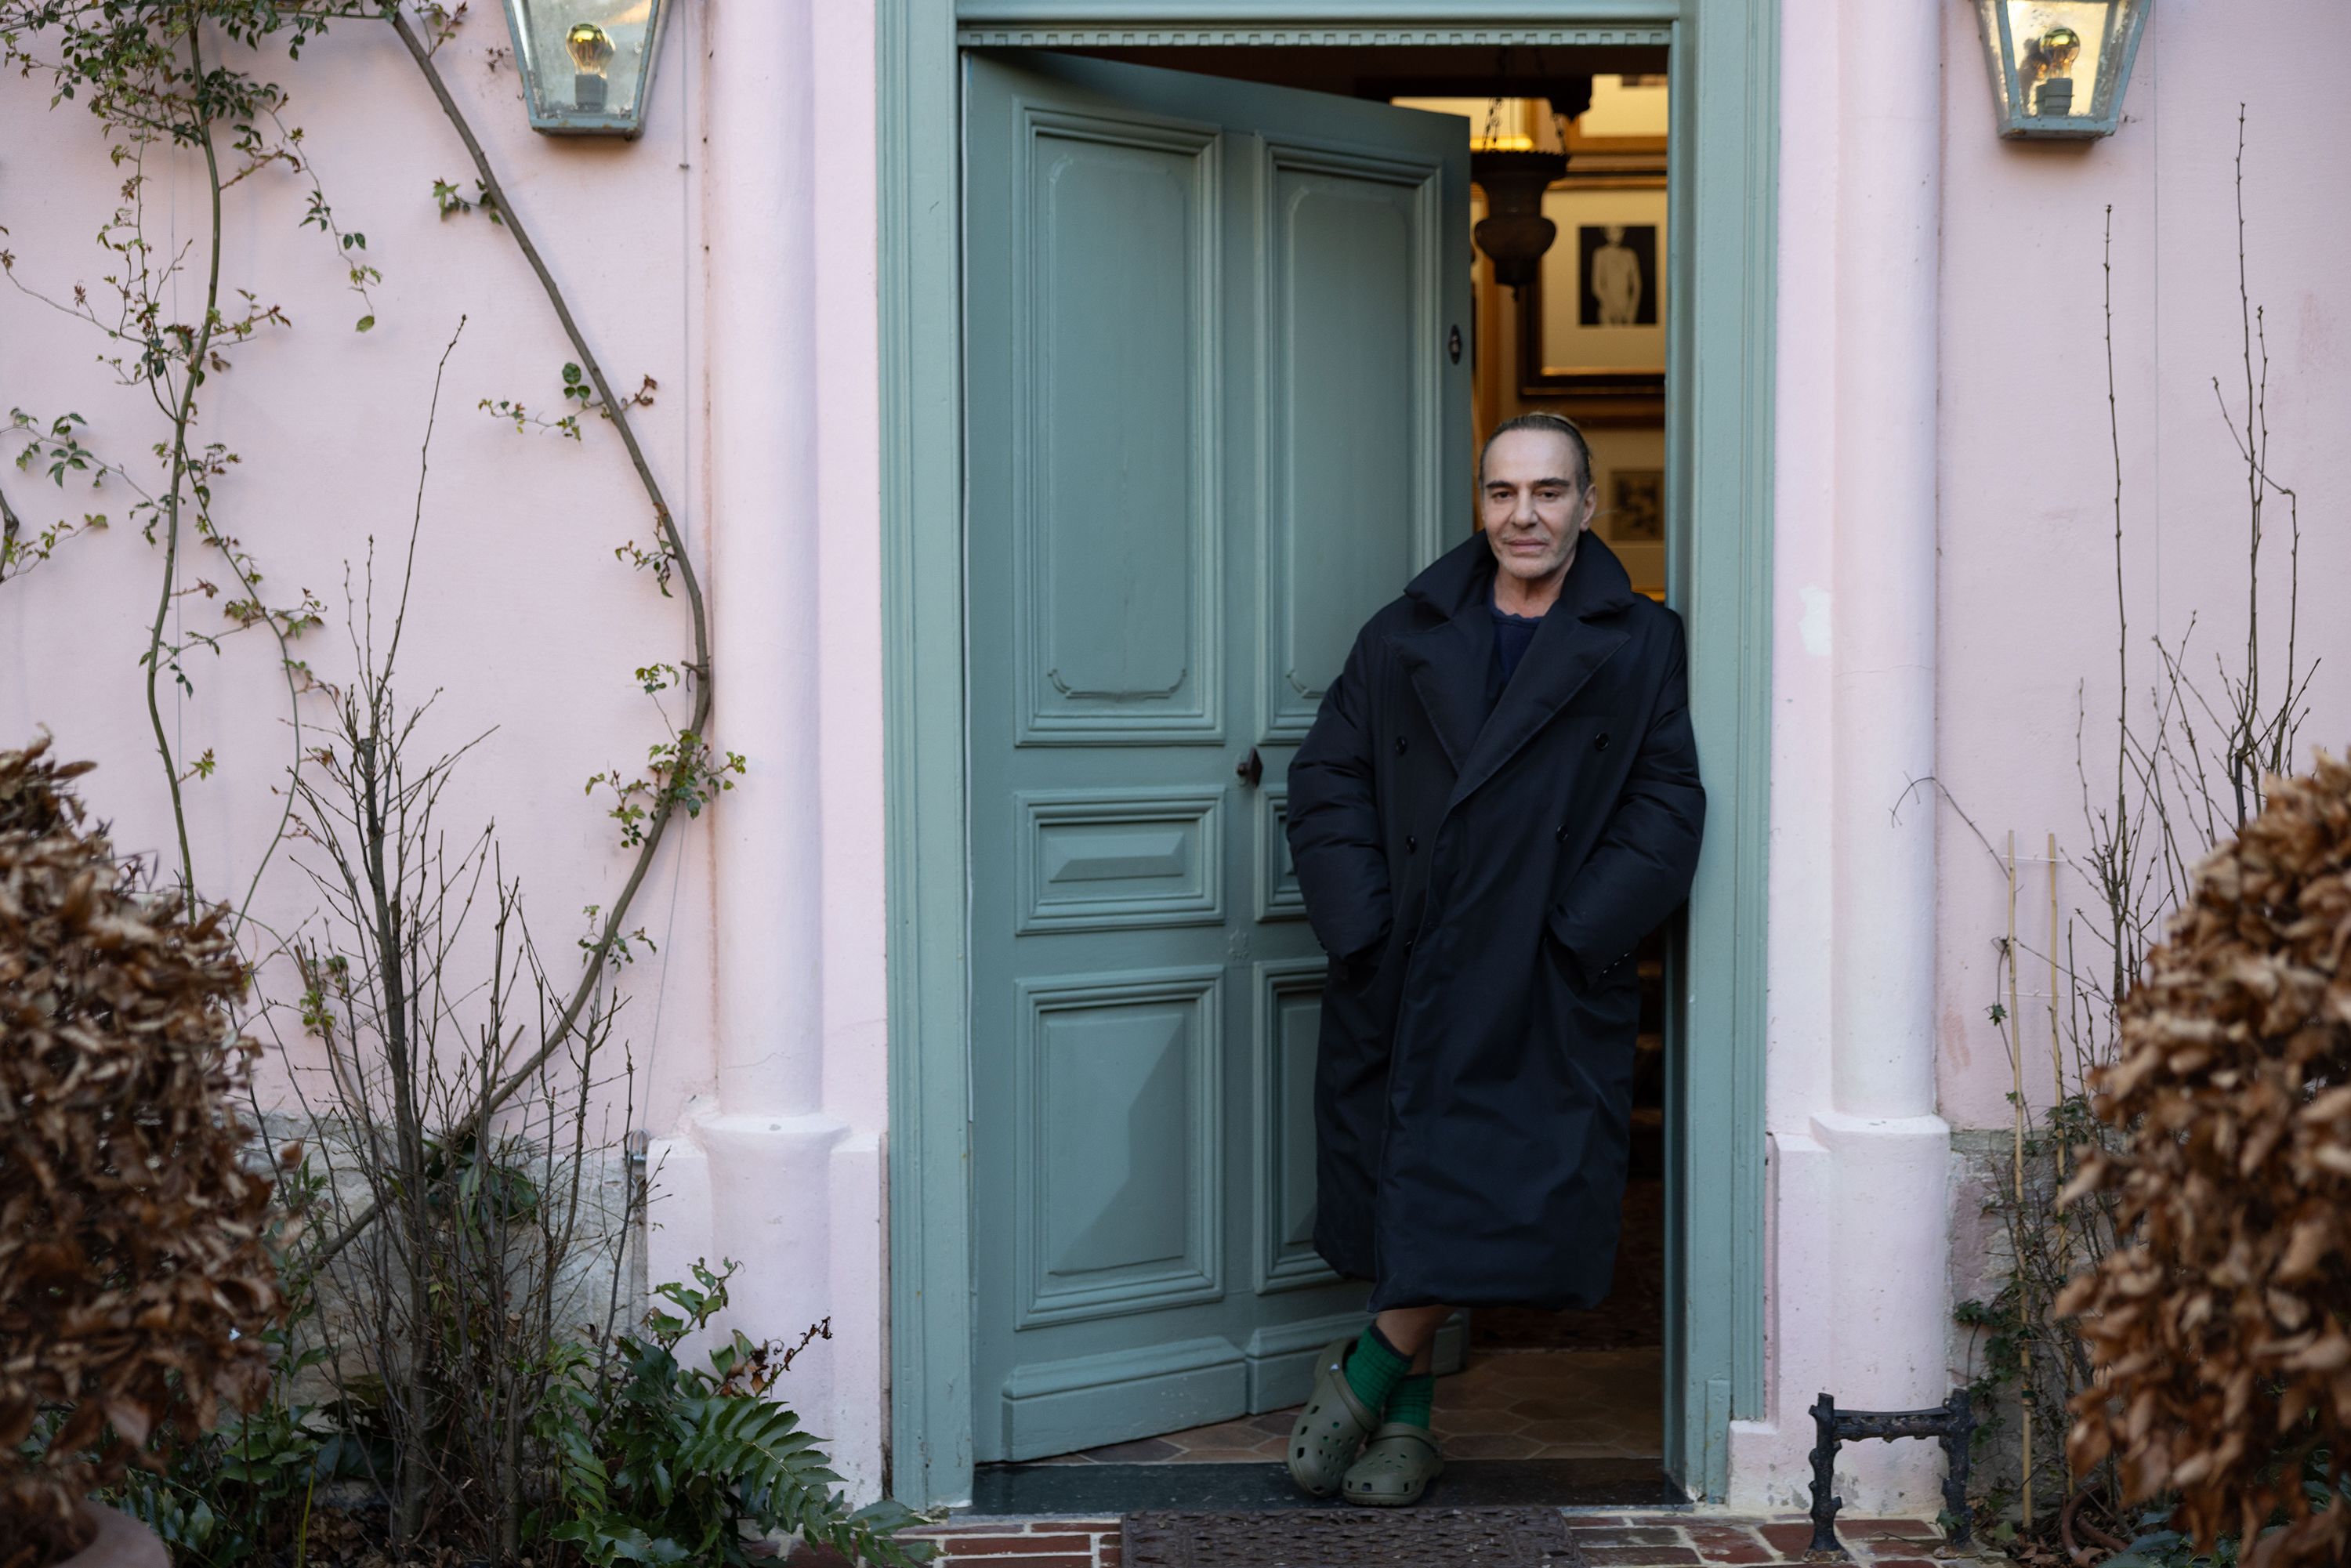 John Galliano, pictured at his home in Beauvais, France.